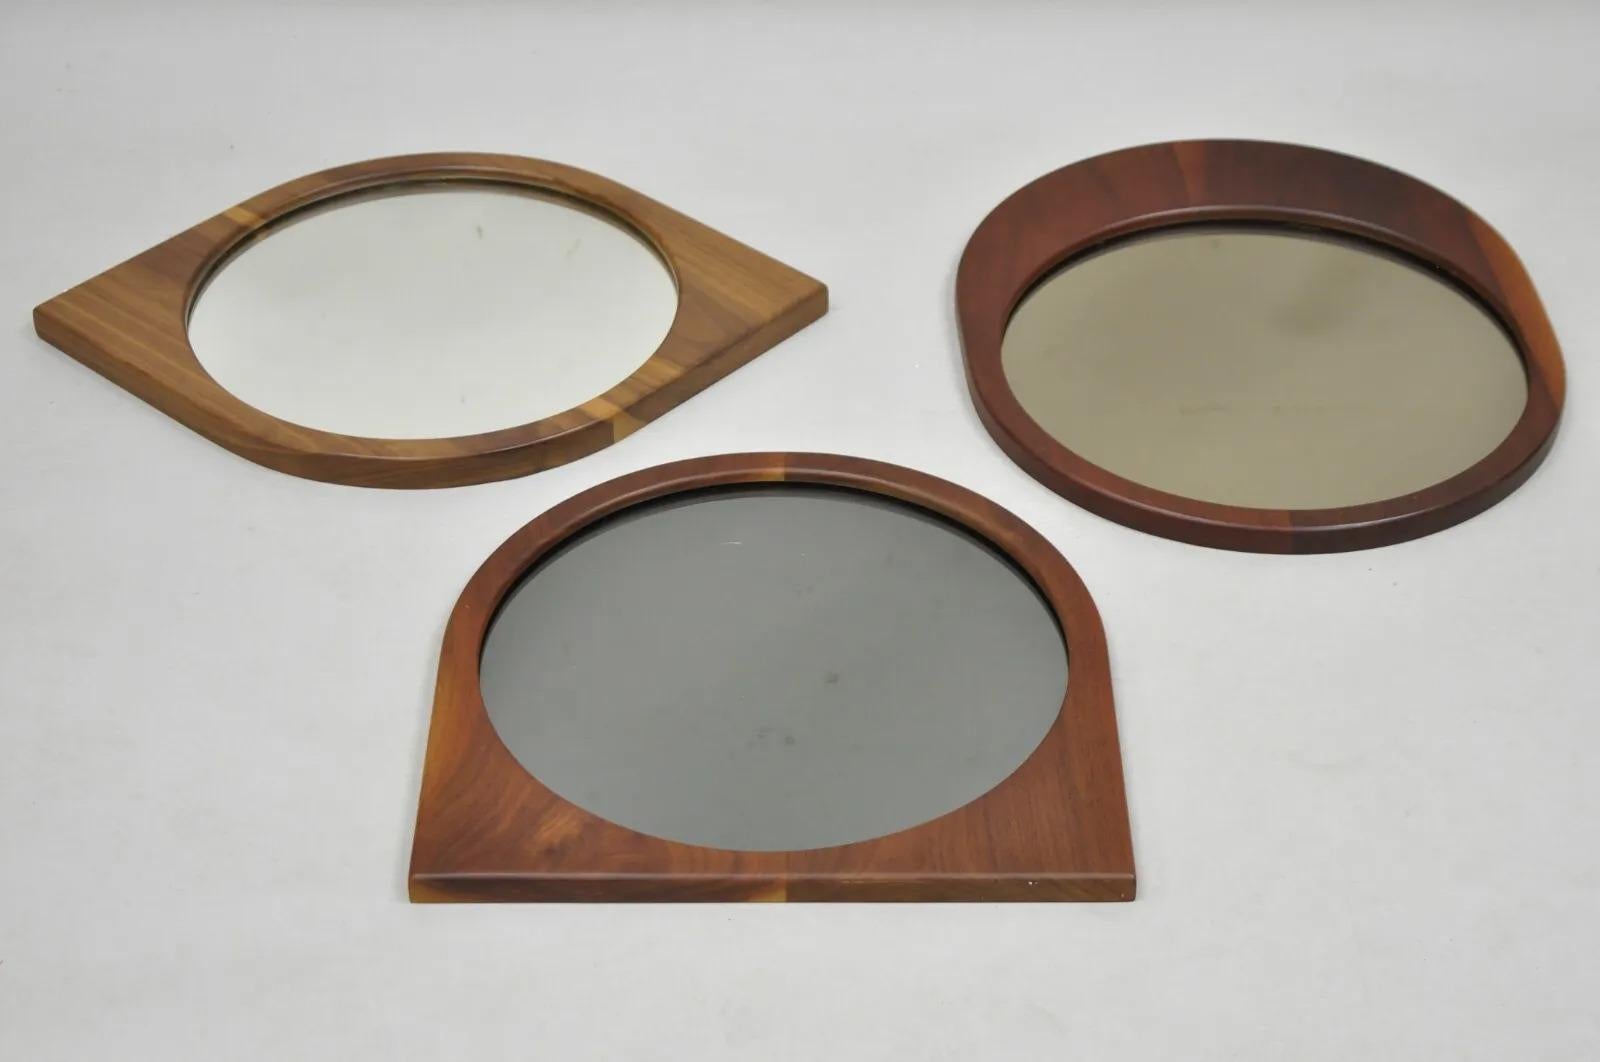 Mid Century Modern Danish Style Sculpted Teak Wood Mirrors - 3 pc Set. Set includes all three mirrors. (1) cat eye mirror with clear mirror, (1) flat bottom with gray smoked mirror, (1) rounded bottom with amber colored mirror, all with beautiful